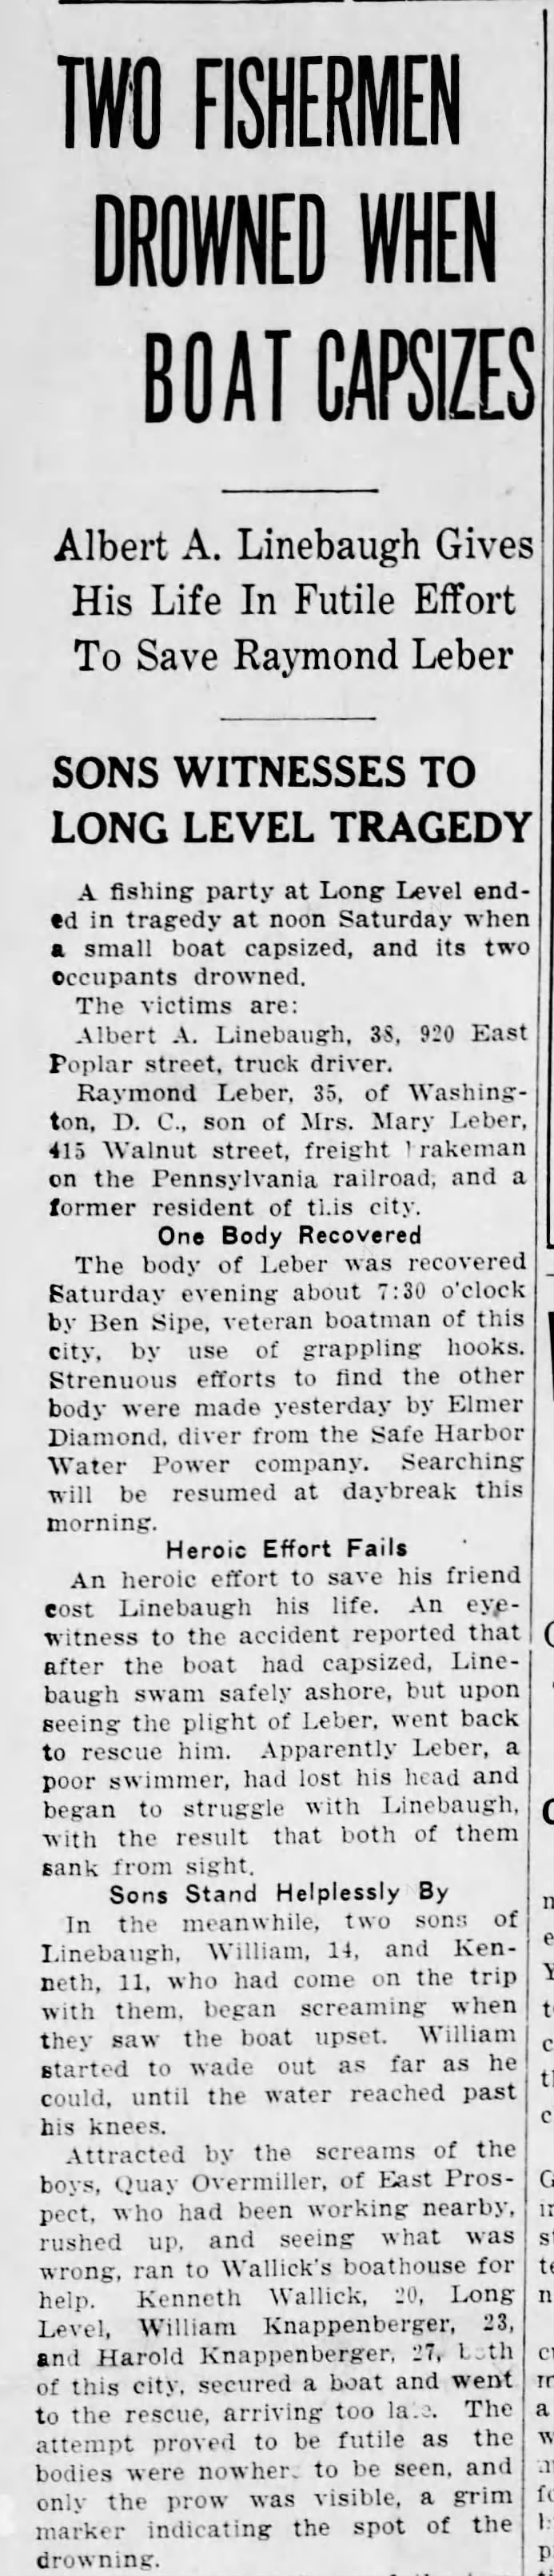 Albert Linebaugh death by drowning-May 1937